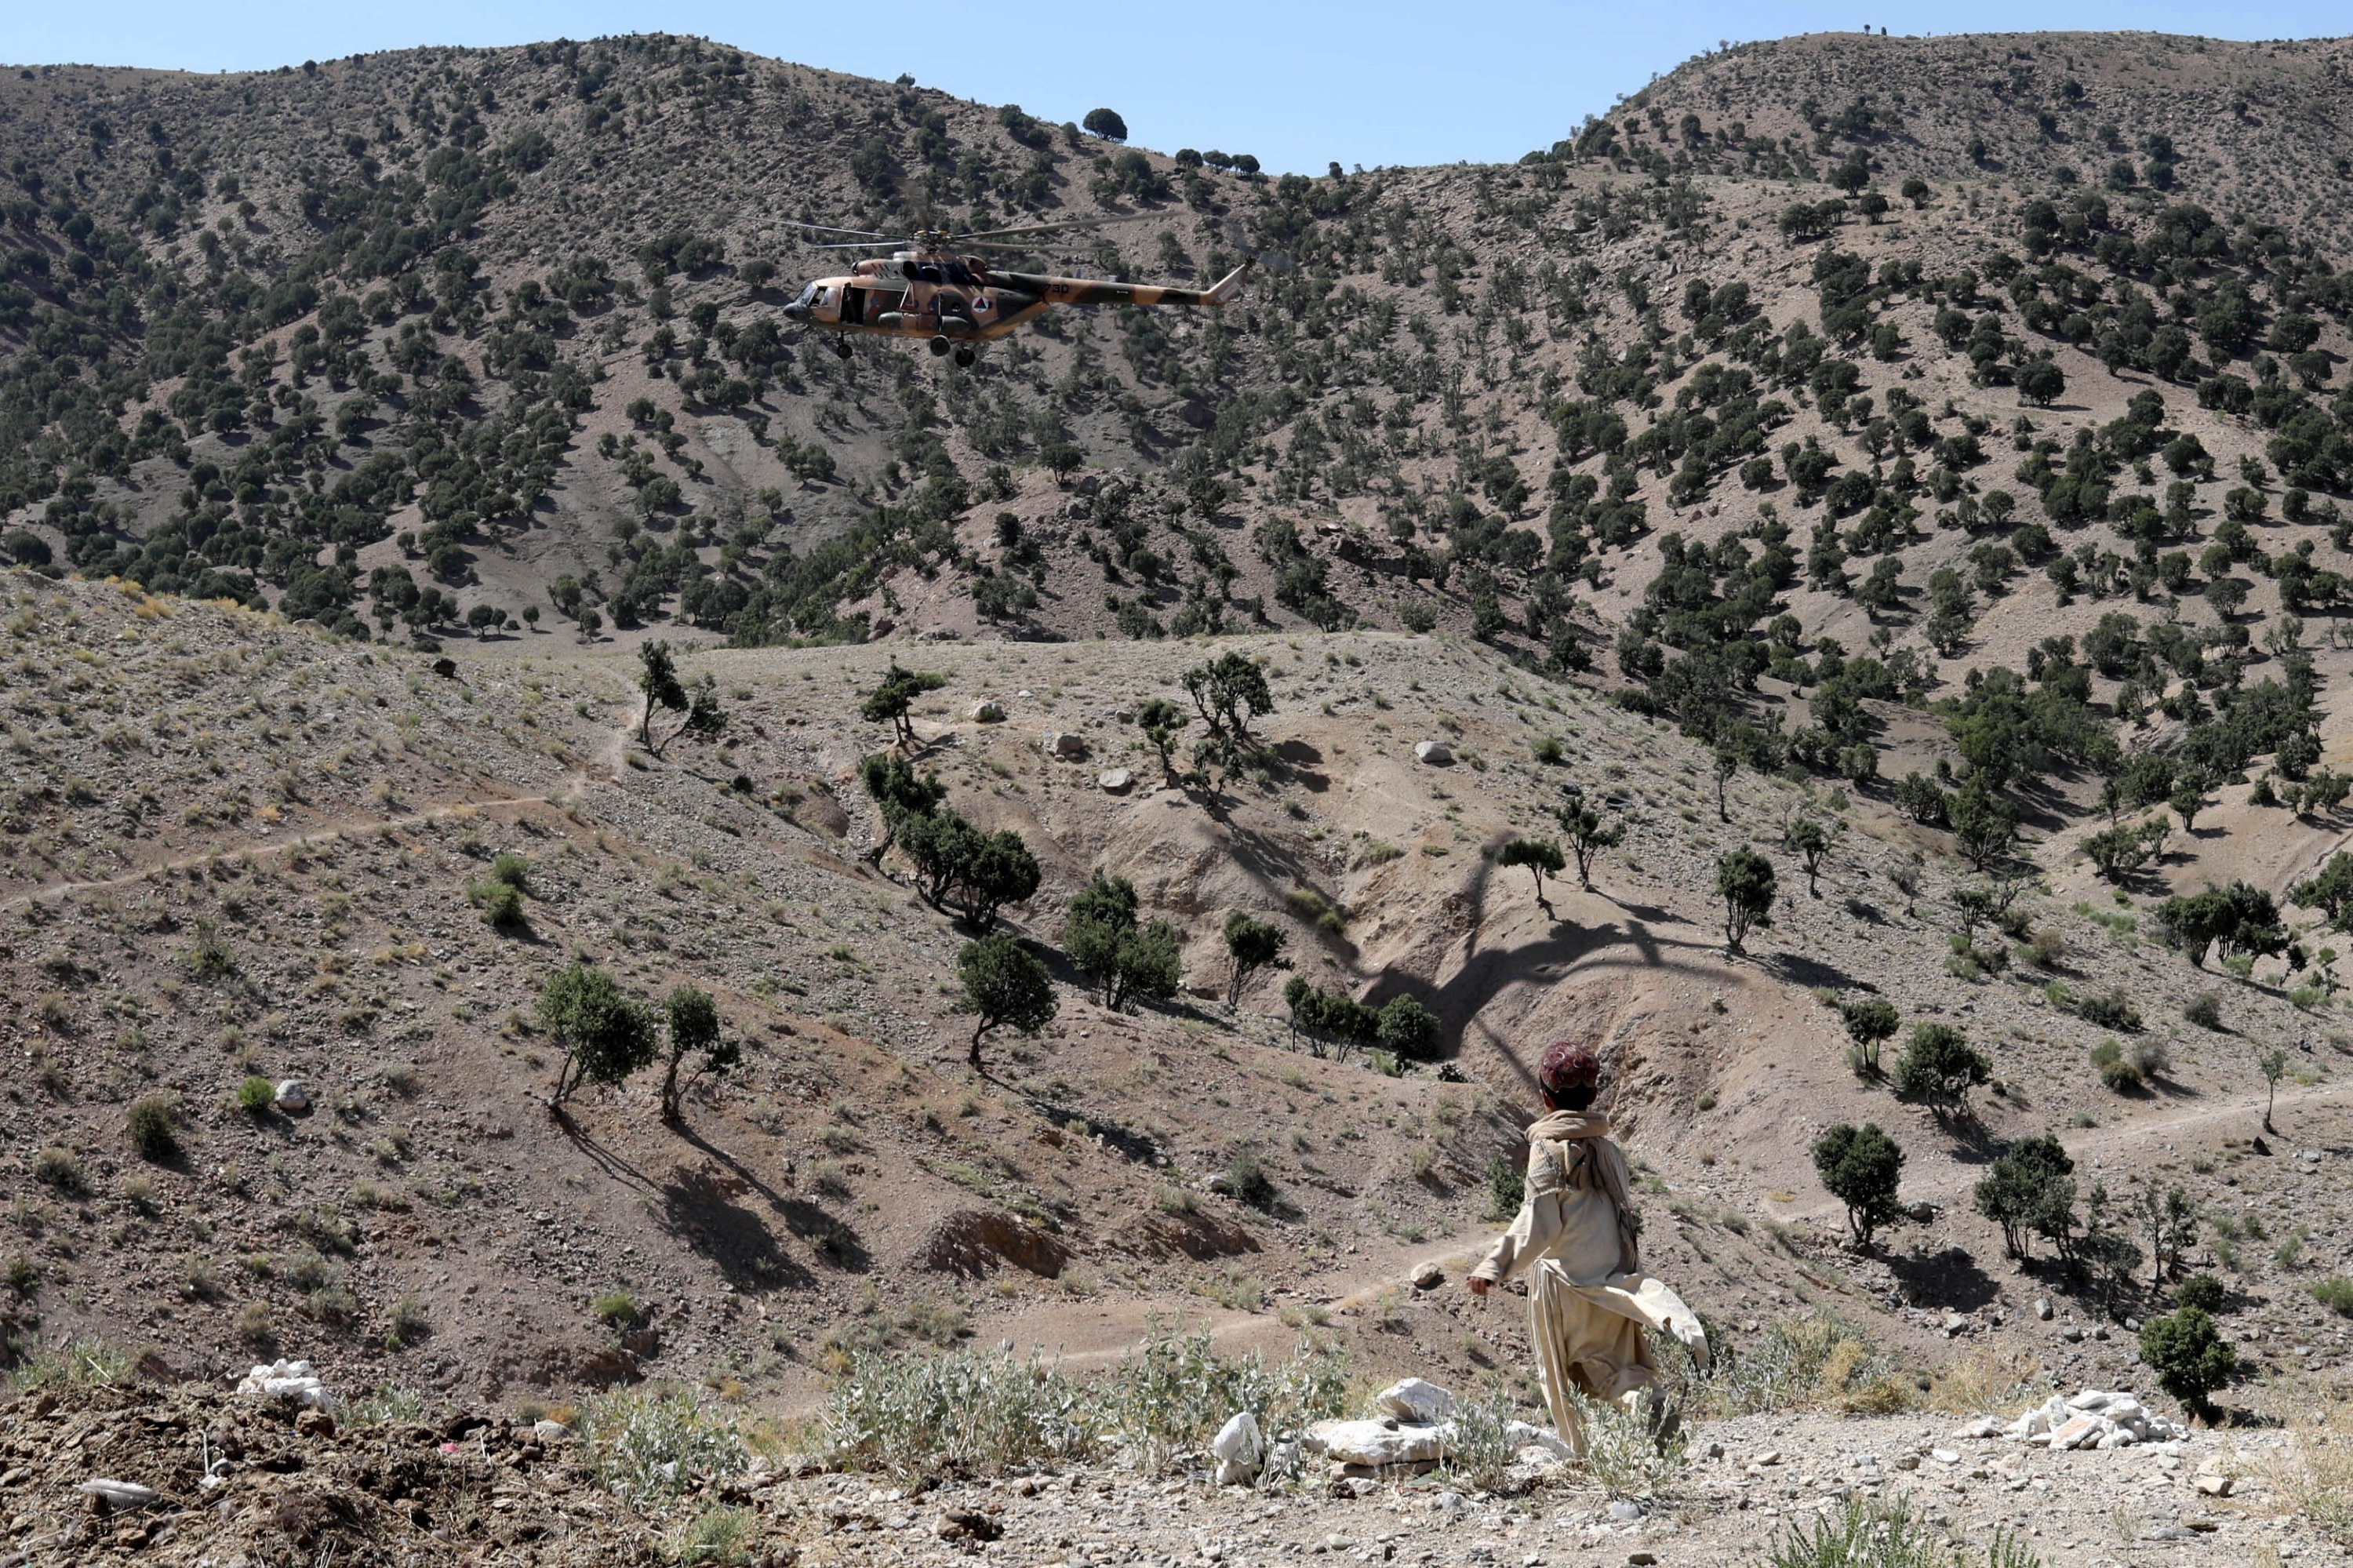 A Taliban helicopter lands in the quake-hit area of Wor Kali village in the Barmal district of Paktika province, Afghanistan, June 25, 2022. (Reuters Photo)